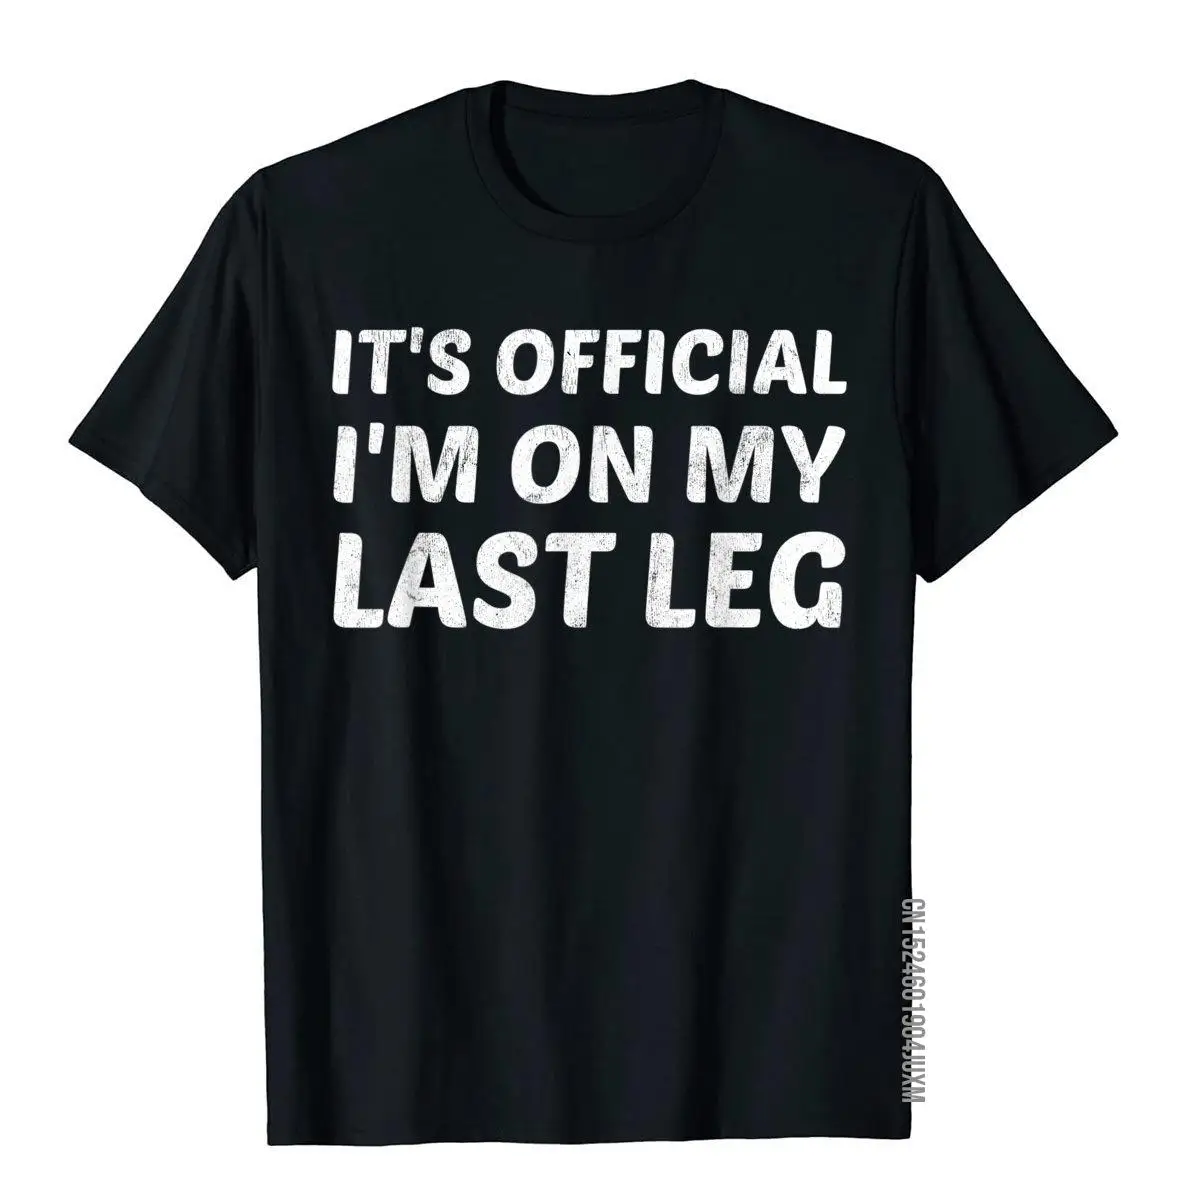 

It's Official I'm On My Last Leg Funny Amputee Humor Gift T-Shirt Cotton Outdoor Tops Tees Graphic Male Top T-Shirts Unique